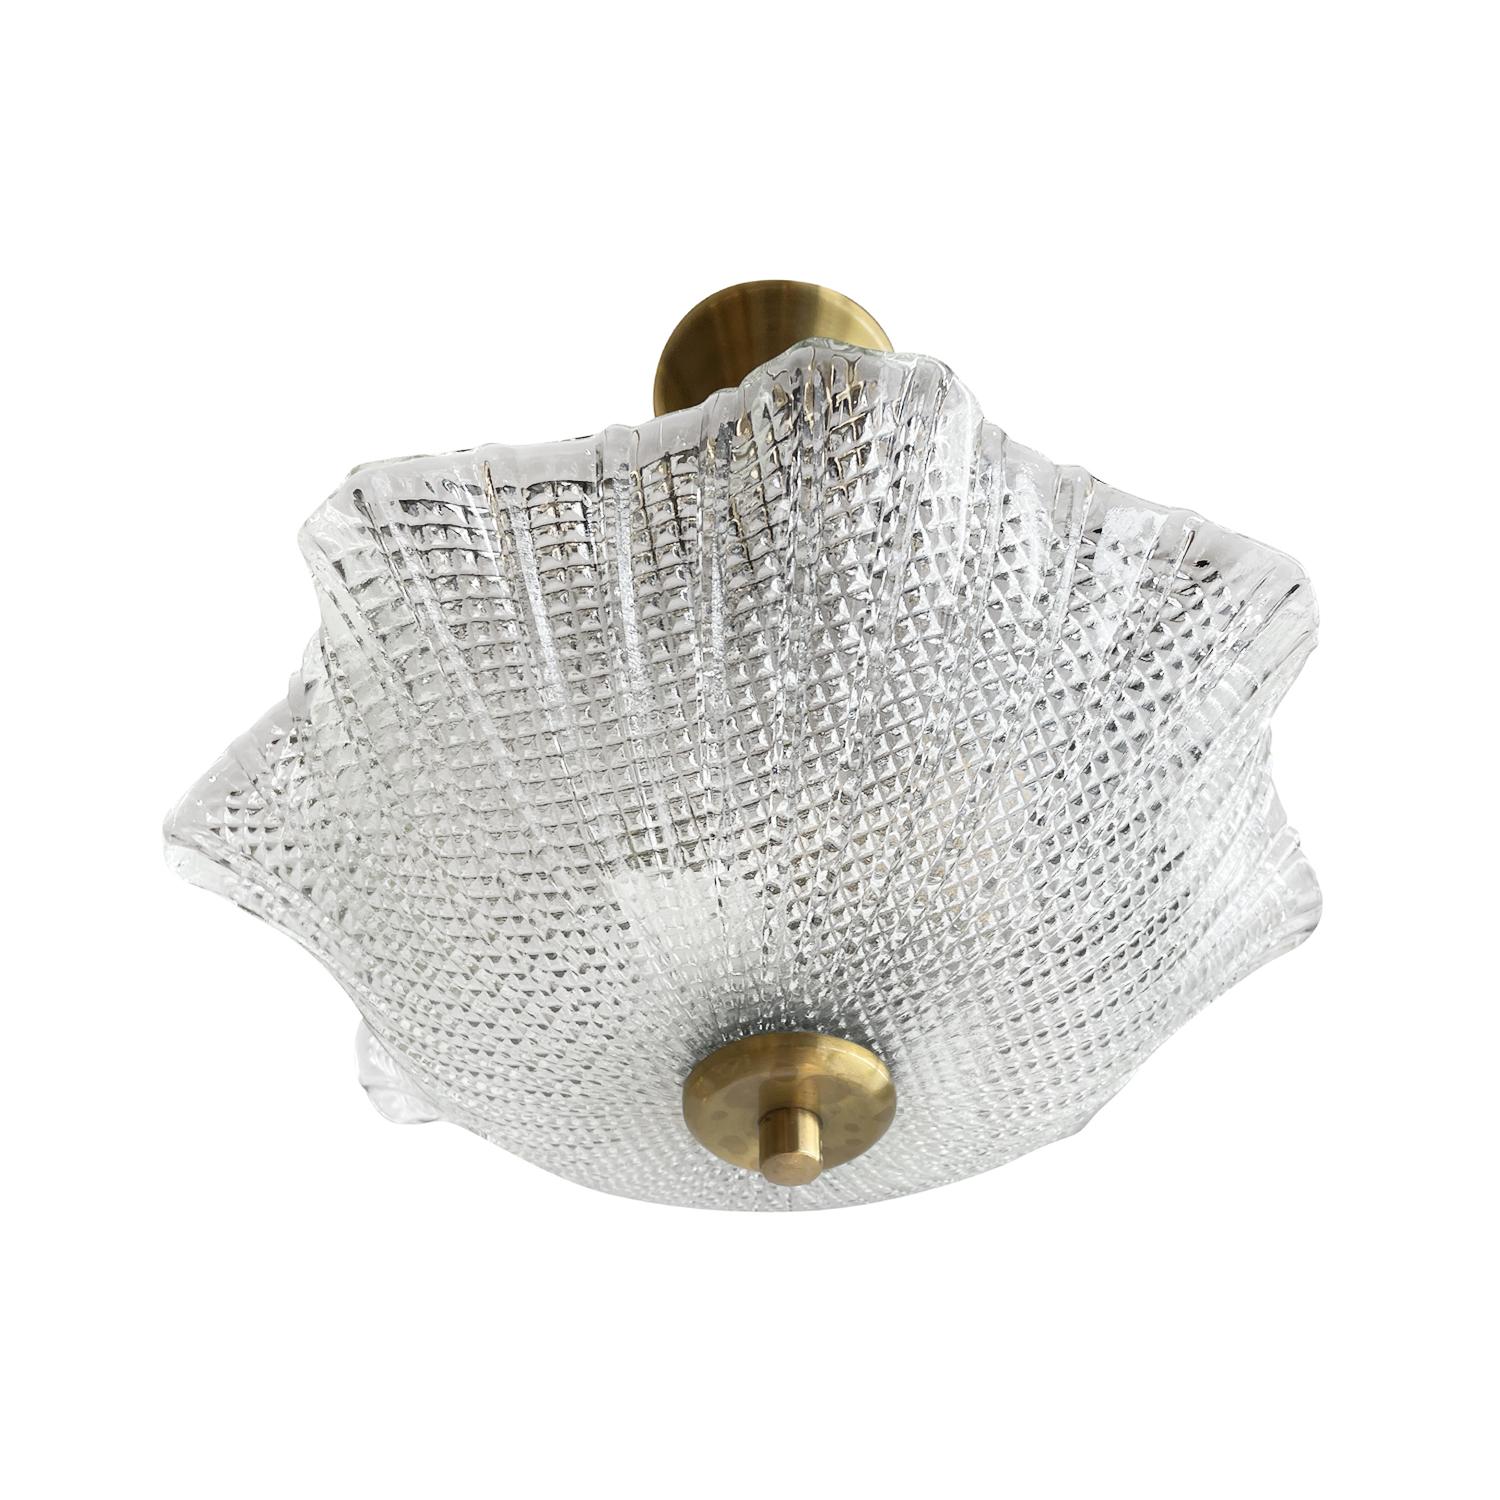 Hand-Crafted 20th Century Swedish Smoked Glass Ceiling Light, Lamp Attributed to Orrefors For Sale